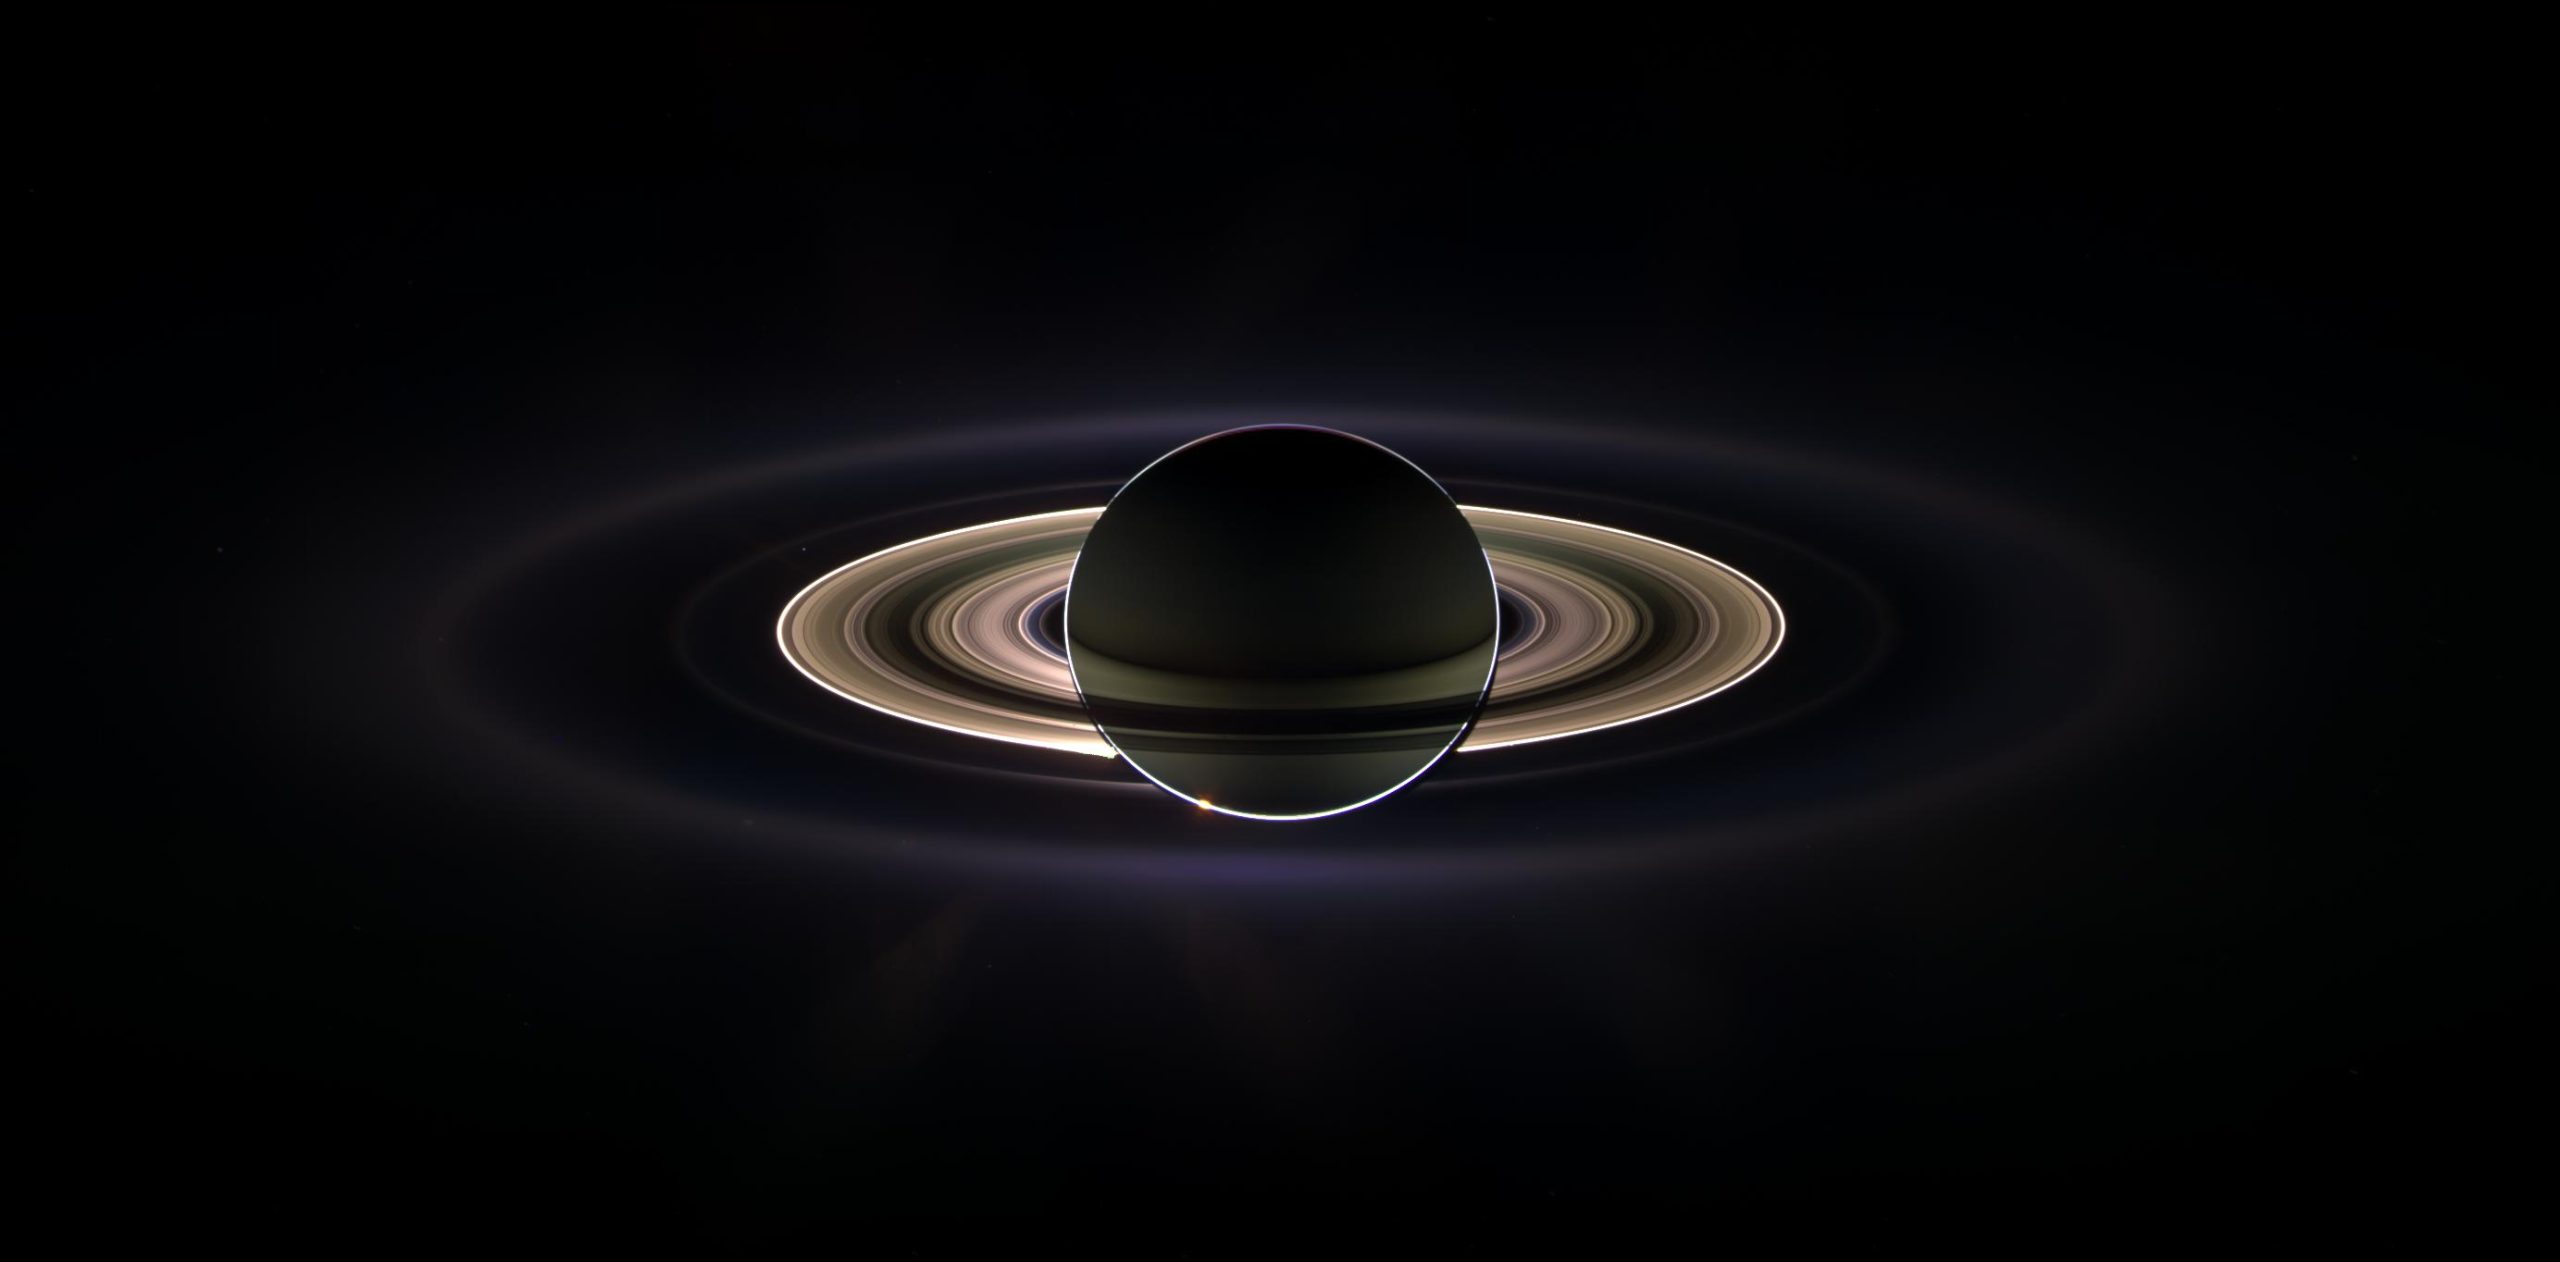 Fig2: Another stunning image below from the spacecraft Cassini is this somewhat artificial total solar eclipse seen from the vantage point of the spacecraft, highlighting the beauty of Saturn's rings. Credit: NASA/JPL/Space Science Institute.